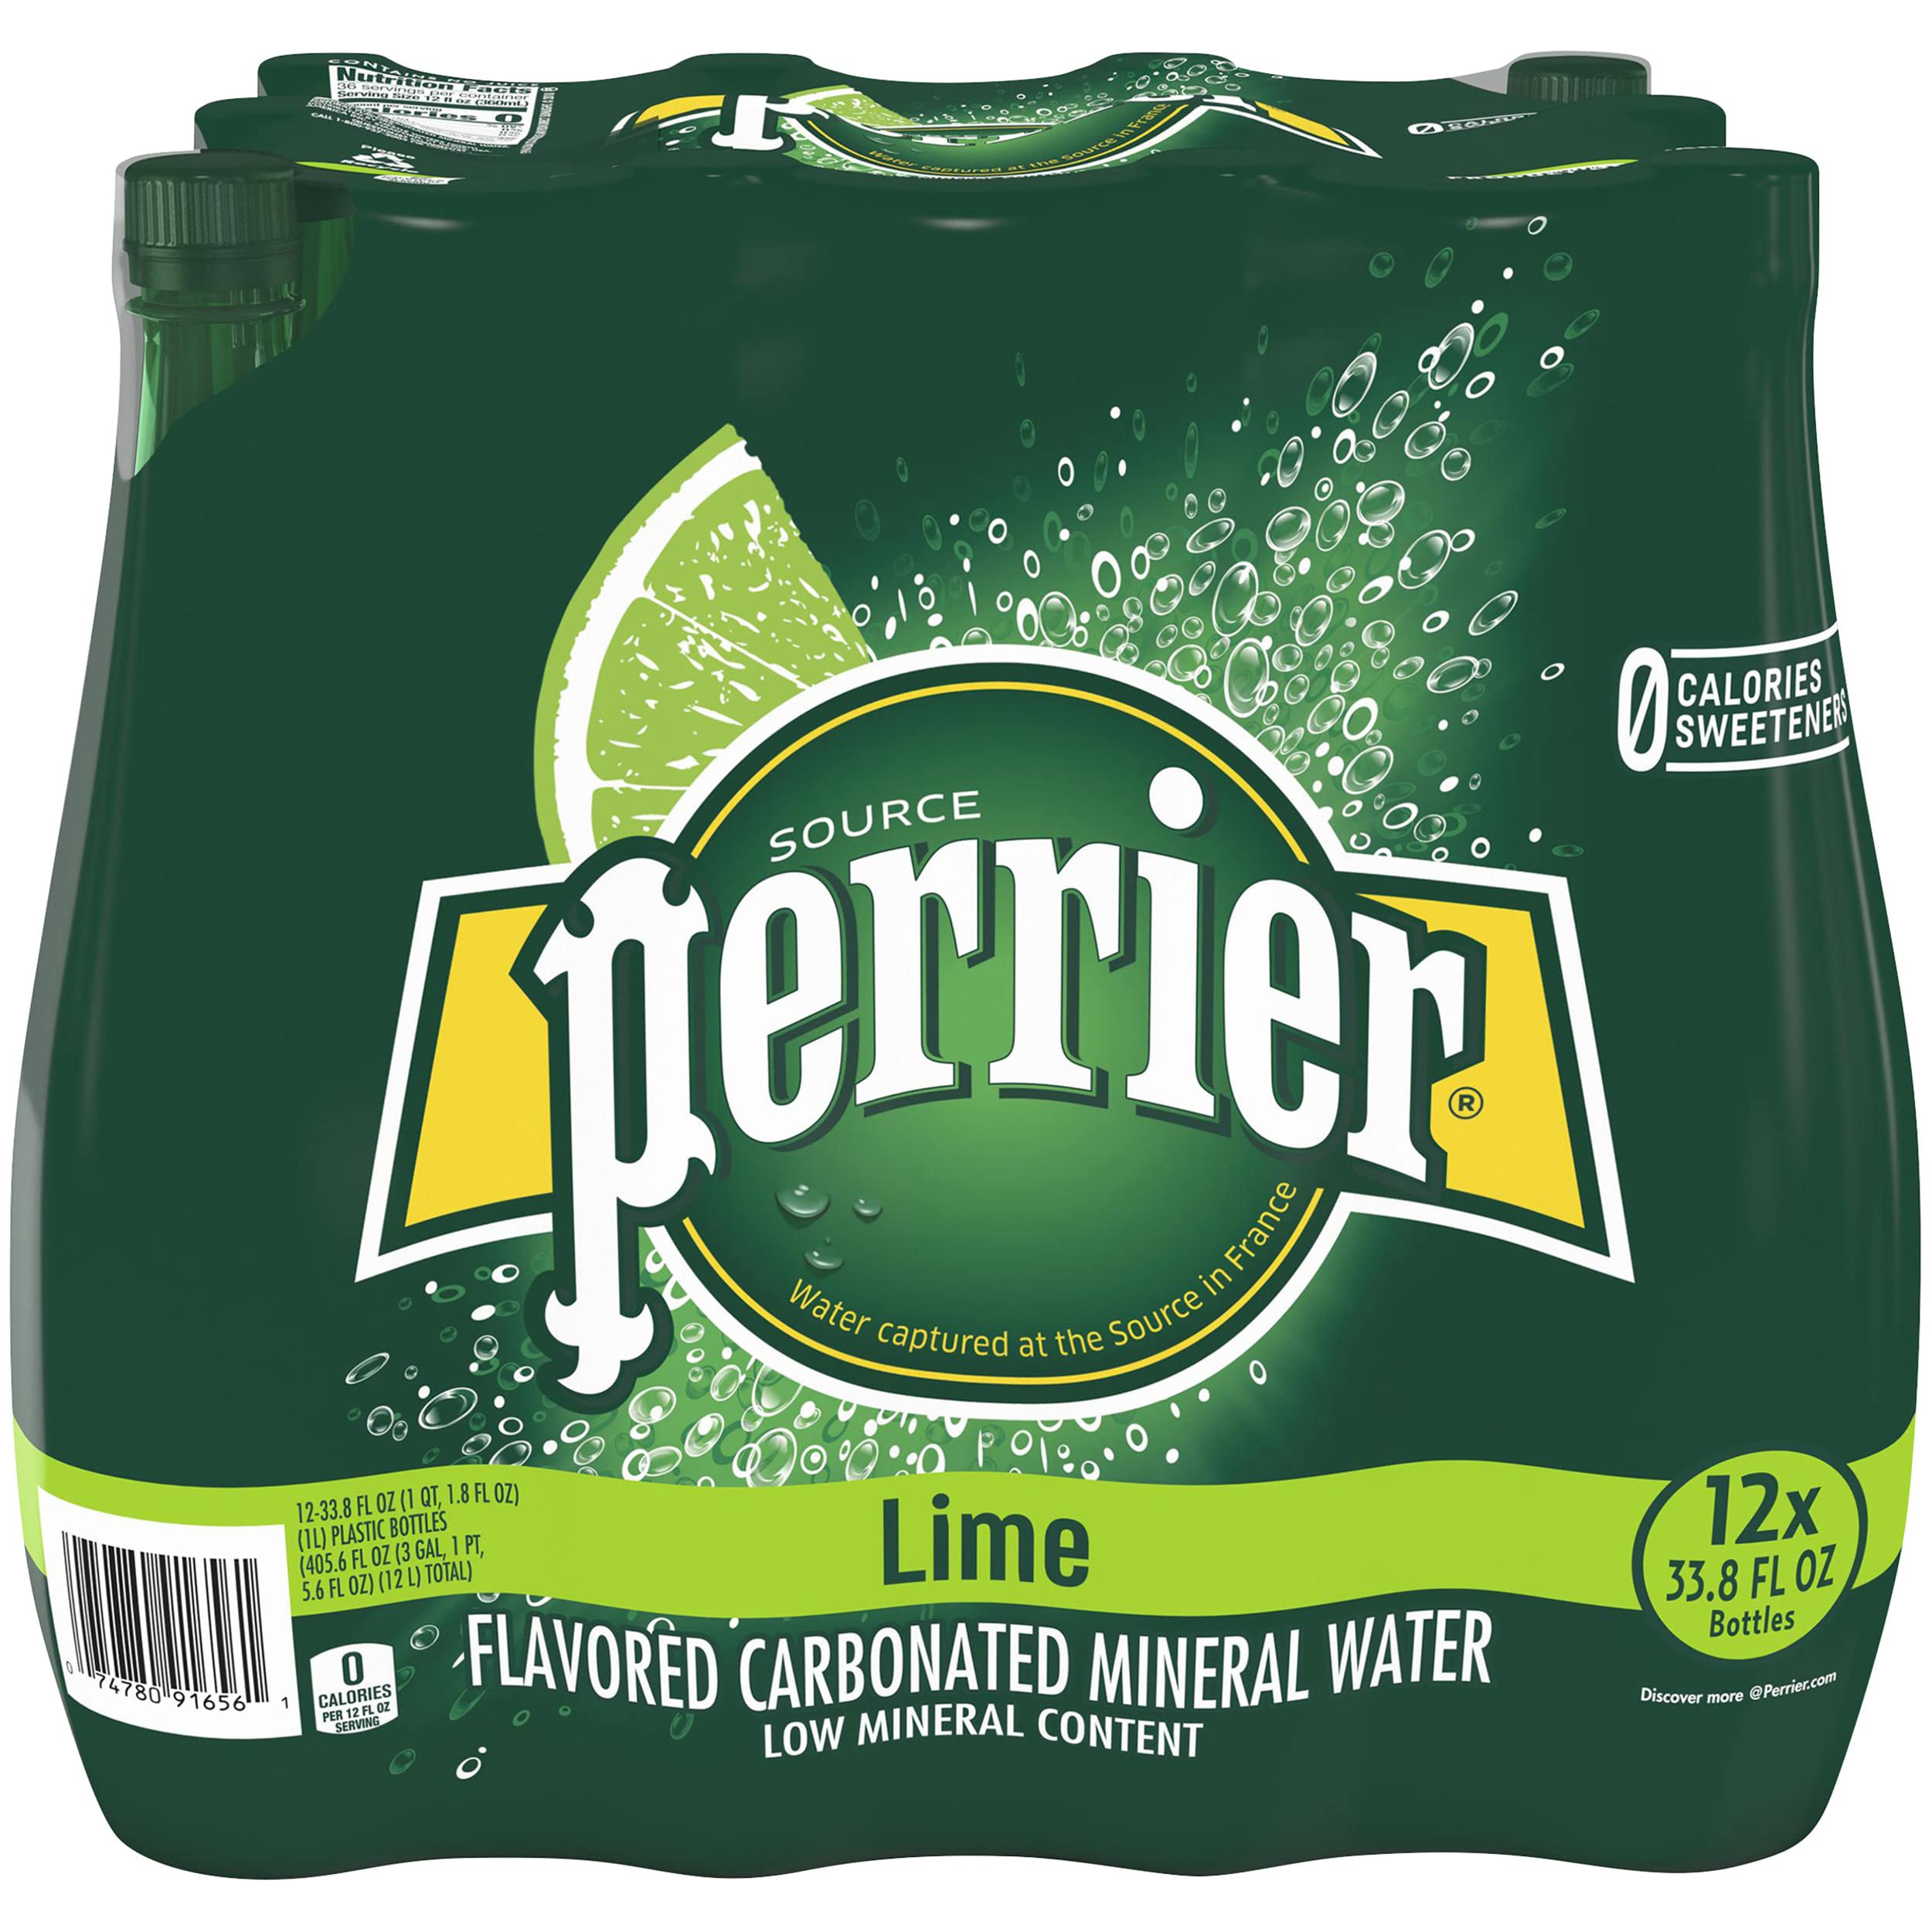 Book Cover Perrier Lime Flavored Sparkling Water, 33.8 FL OZ, 1L Plastic Water Bottles (12 Count) Carbonated Mineral Water Lime